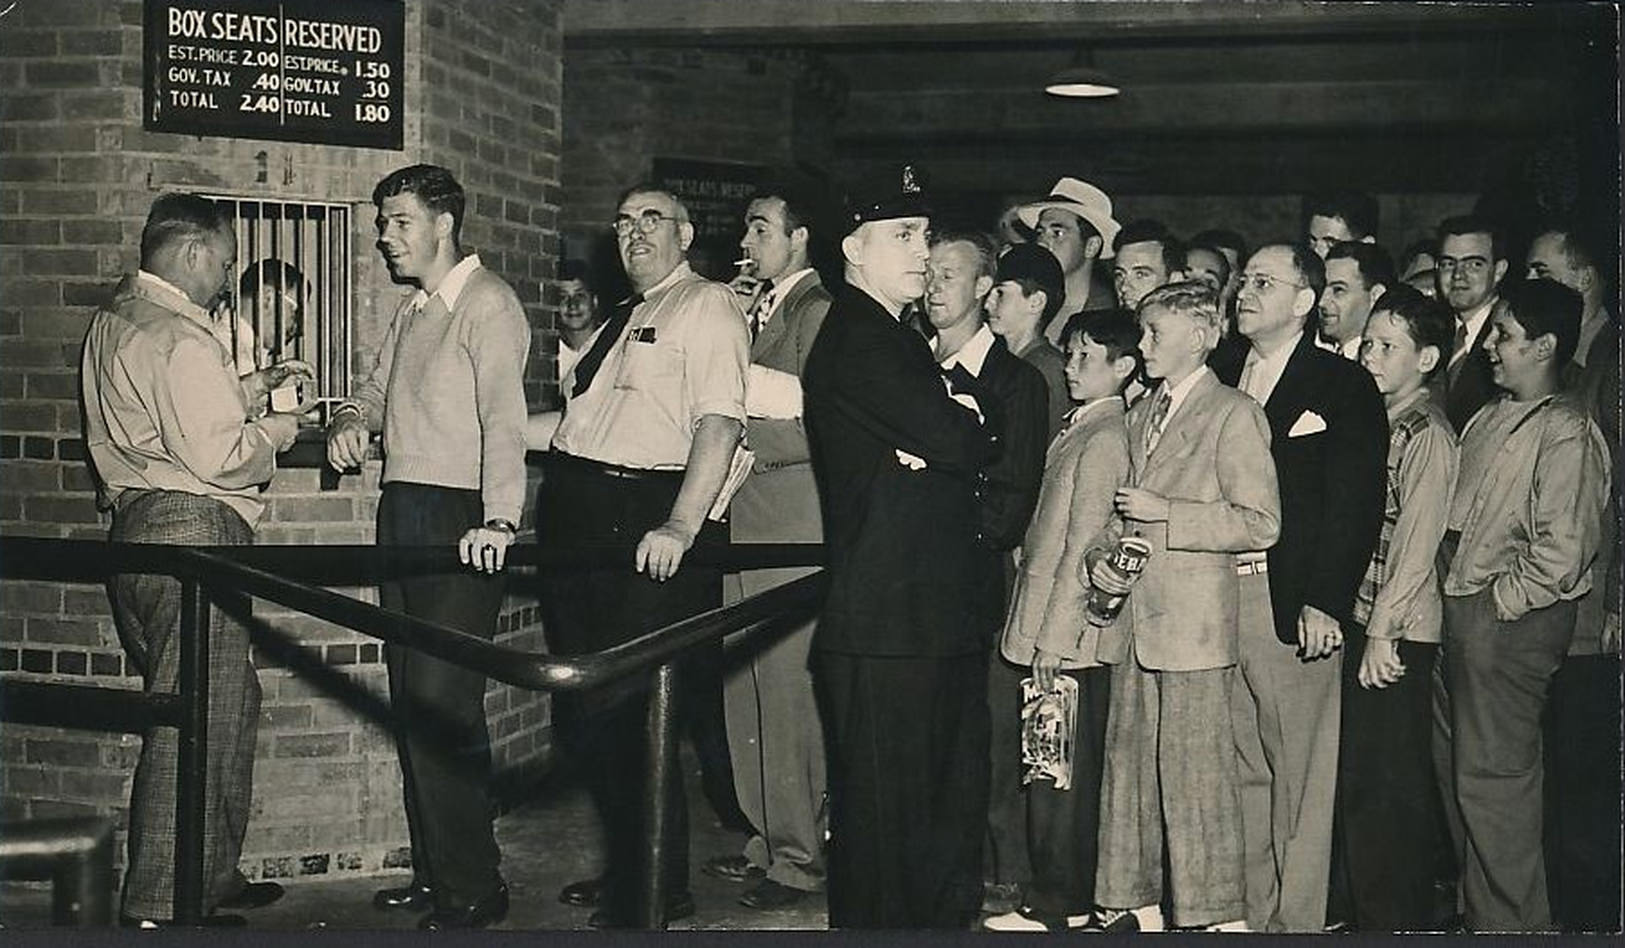 Fans lined up for tickets in Fenway Park, Boston, 1946